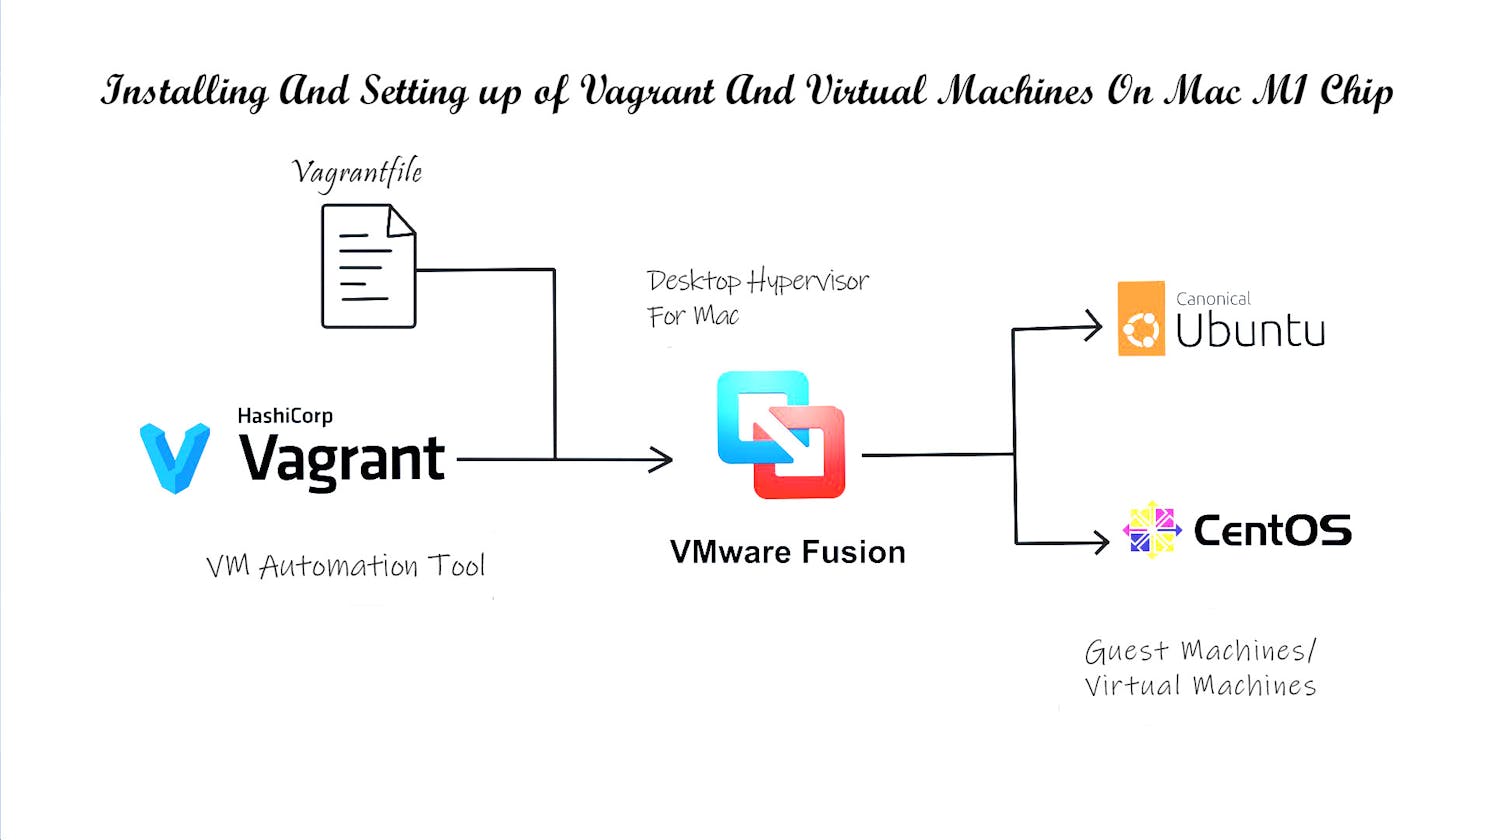 How To Install And Setup Vagrant And Virtual Machines On Mac M1 Chip.